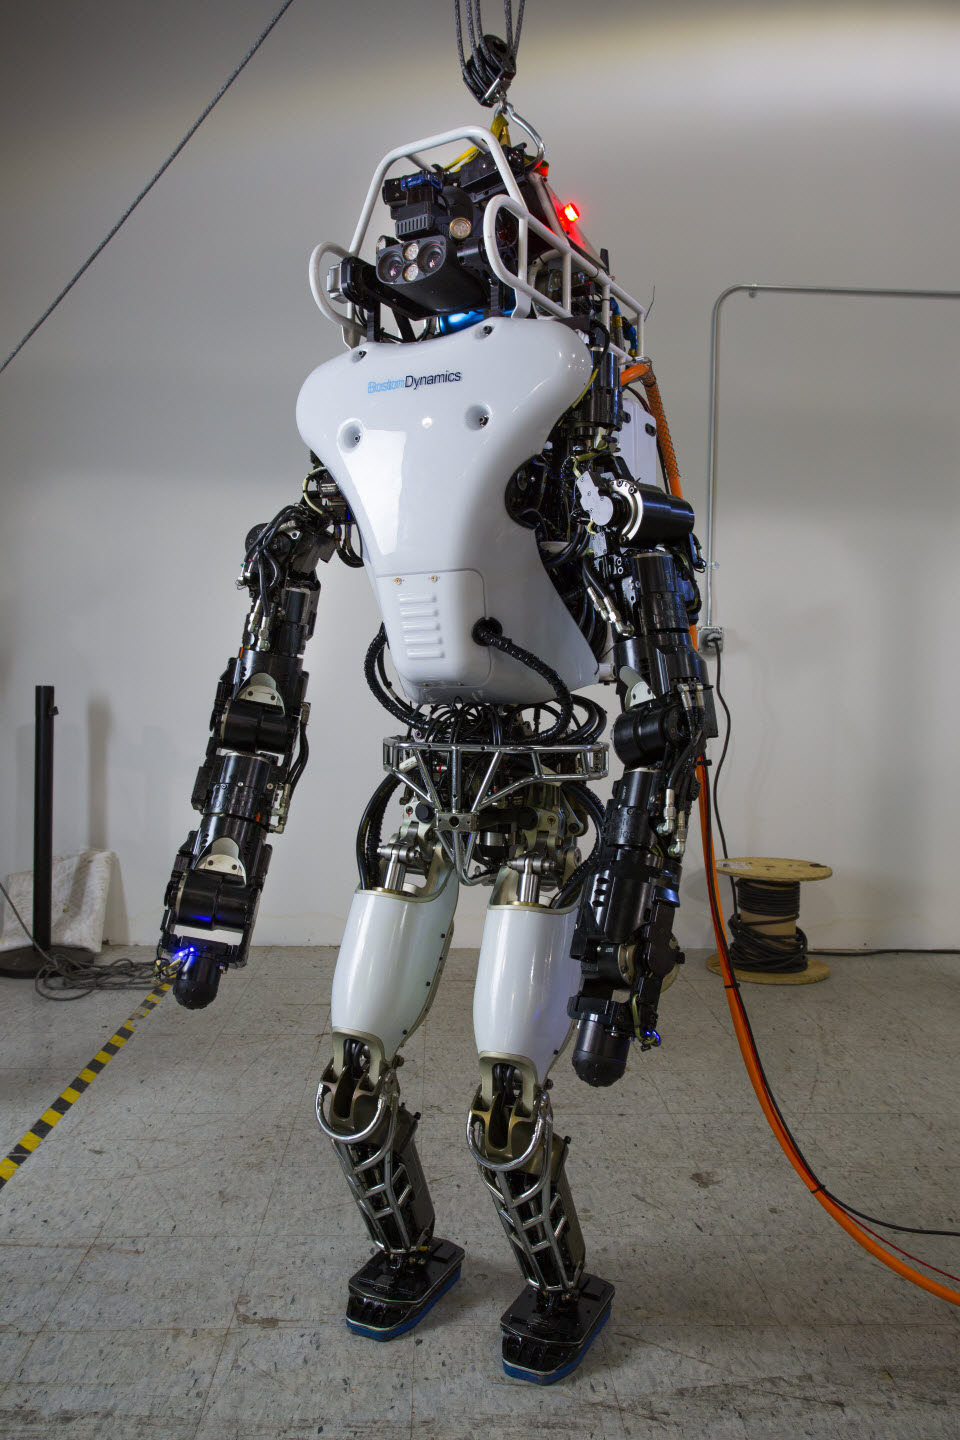 The DARPA Robotics Challenge teams using the Atlas robot met in Waltham, Mass., on January 12, 2015, to learn about upgrades to the robot. DARPA image courtesy of Worcester Polytechnic Institute.